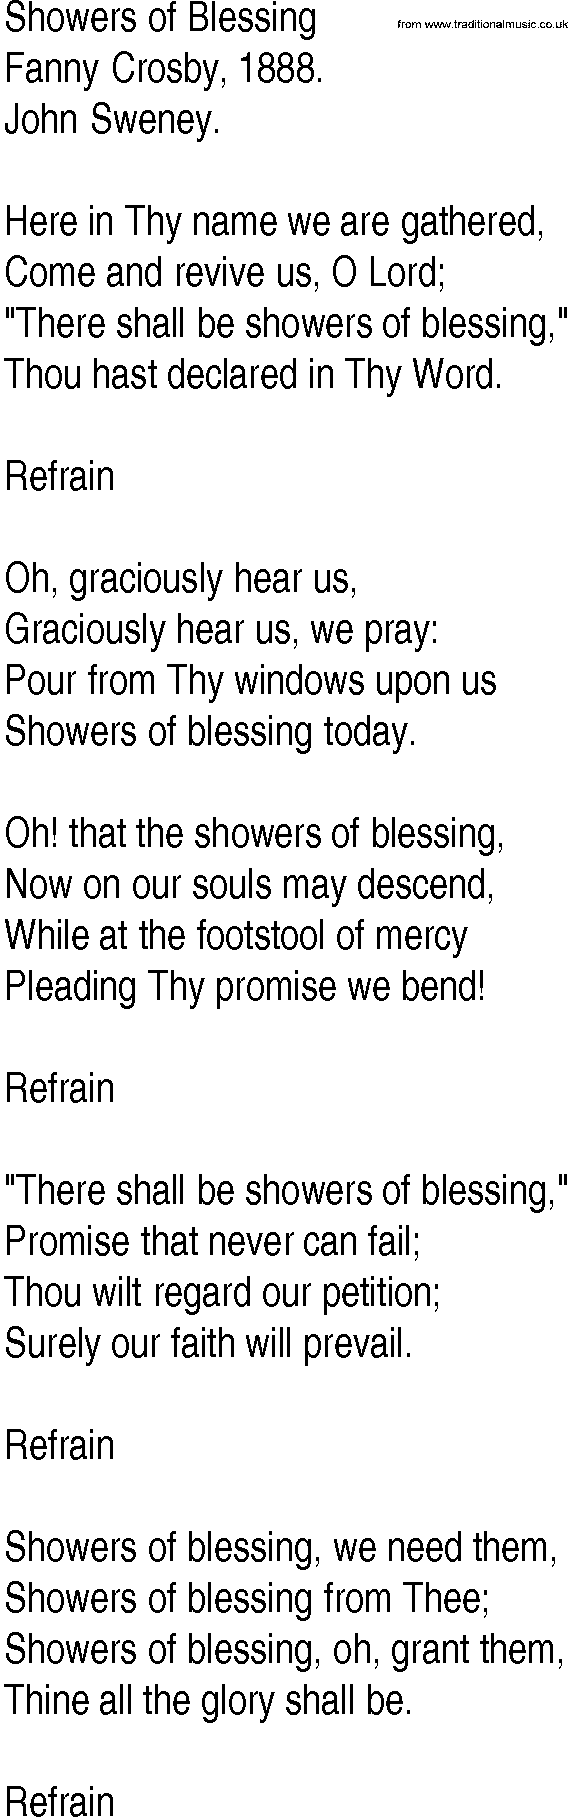 Hymn and Gospel Song: Showers of Blessing by Fanny Crosby lyrics